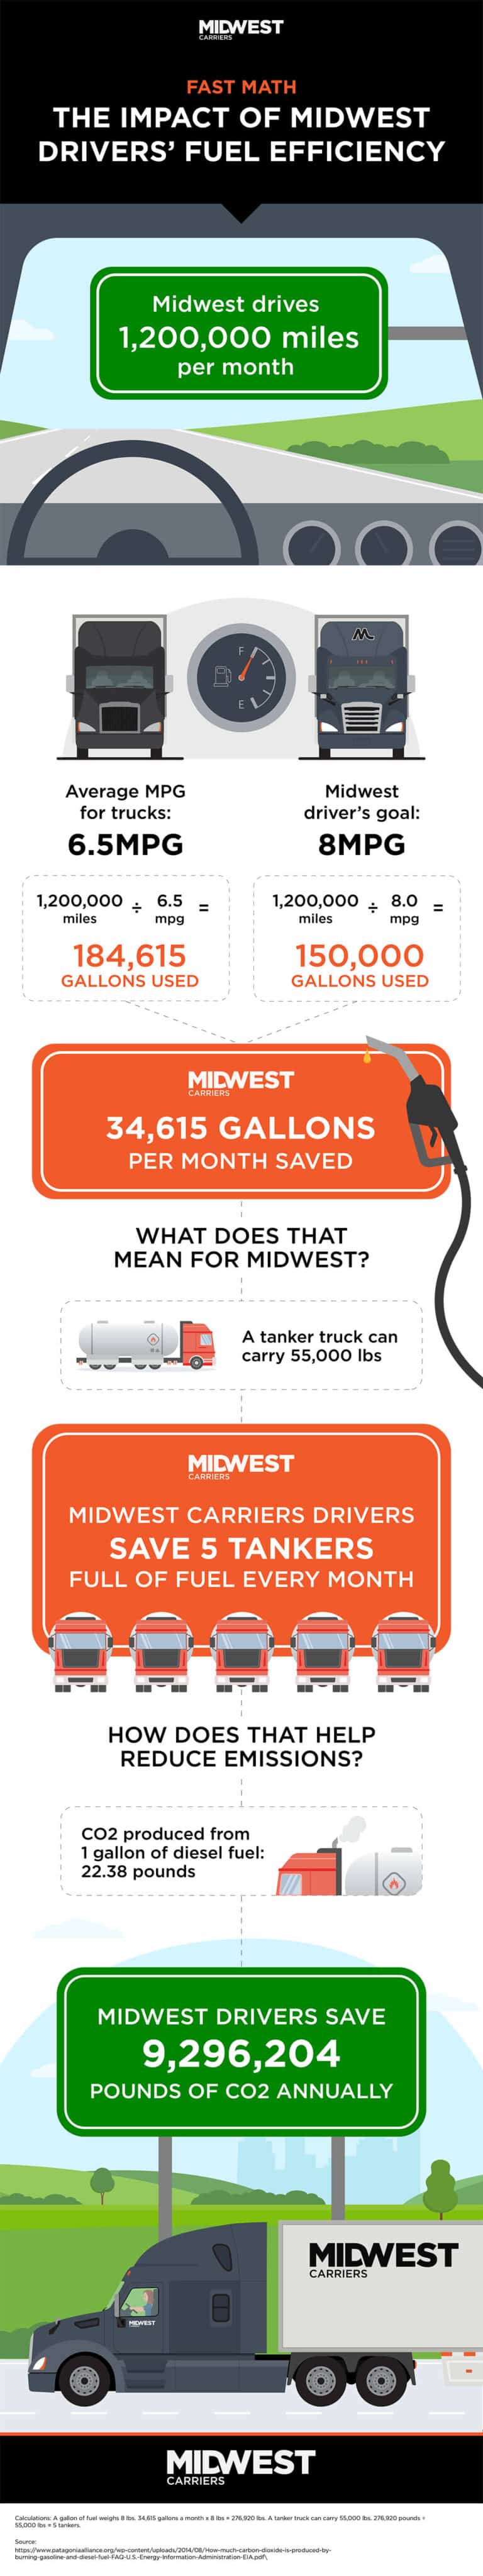 Midwest Infographic Fuel Efficiency D01V01.01 FINAL 768x4097 